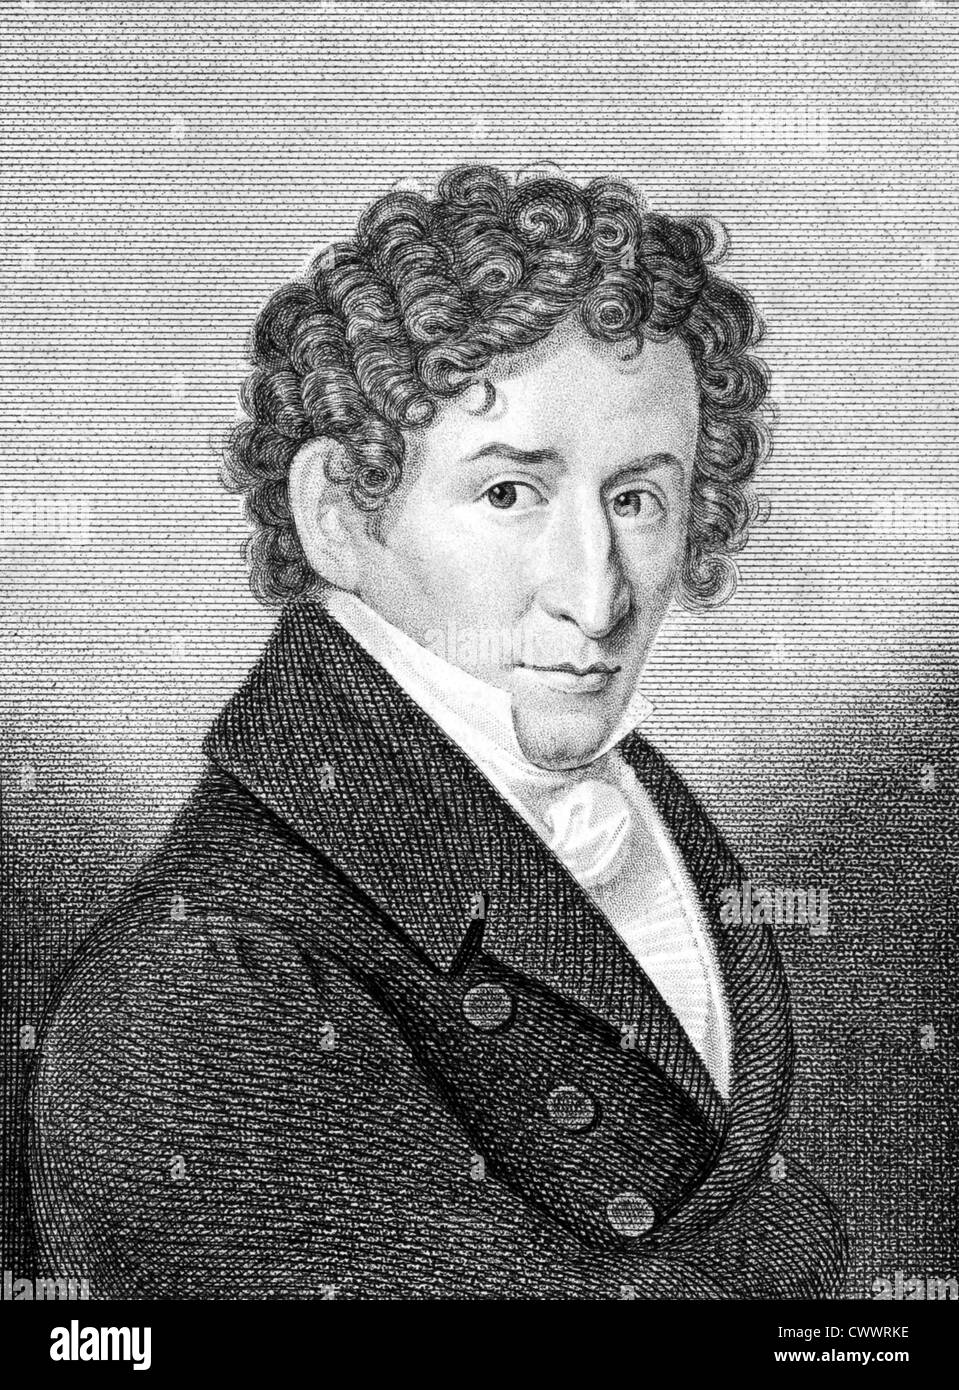 Ludwig Devrient (1784-1832) on engraving from 1859. German actor. Stock Photo